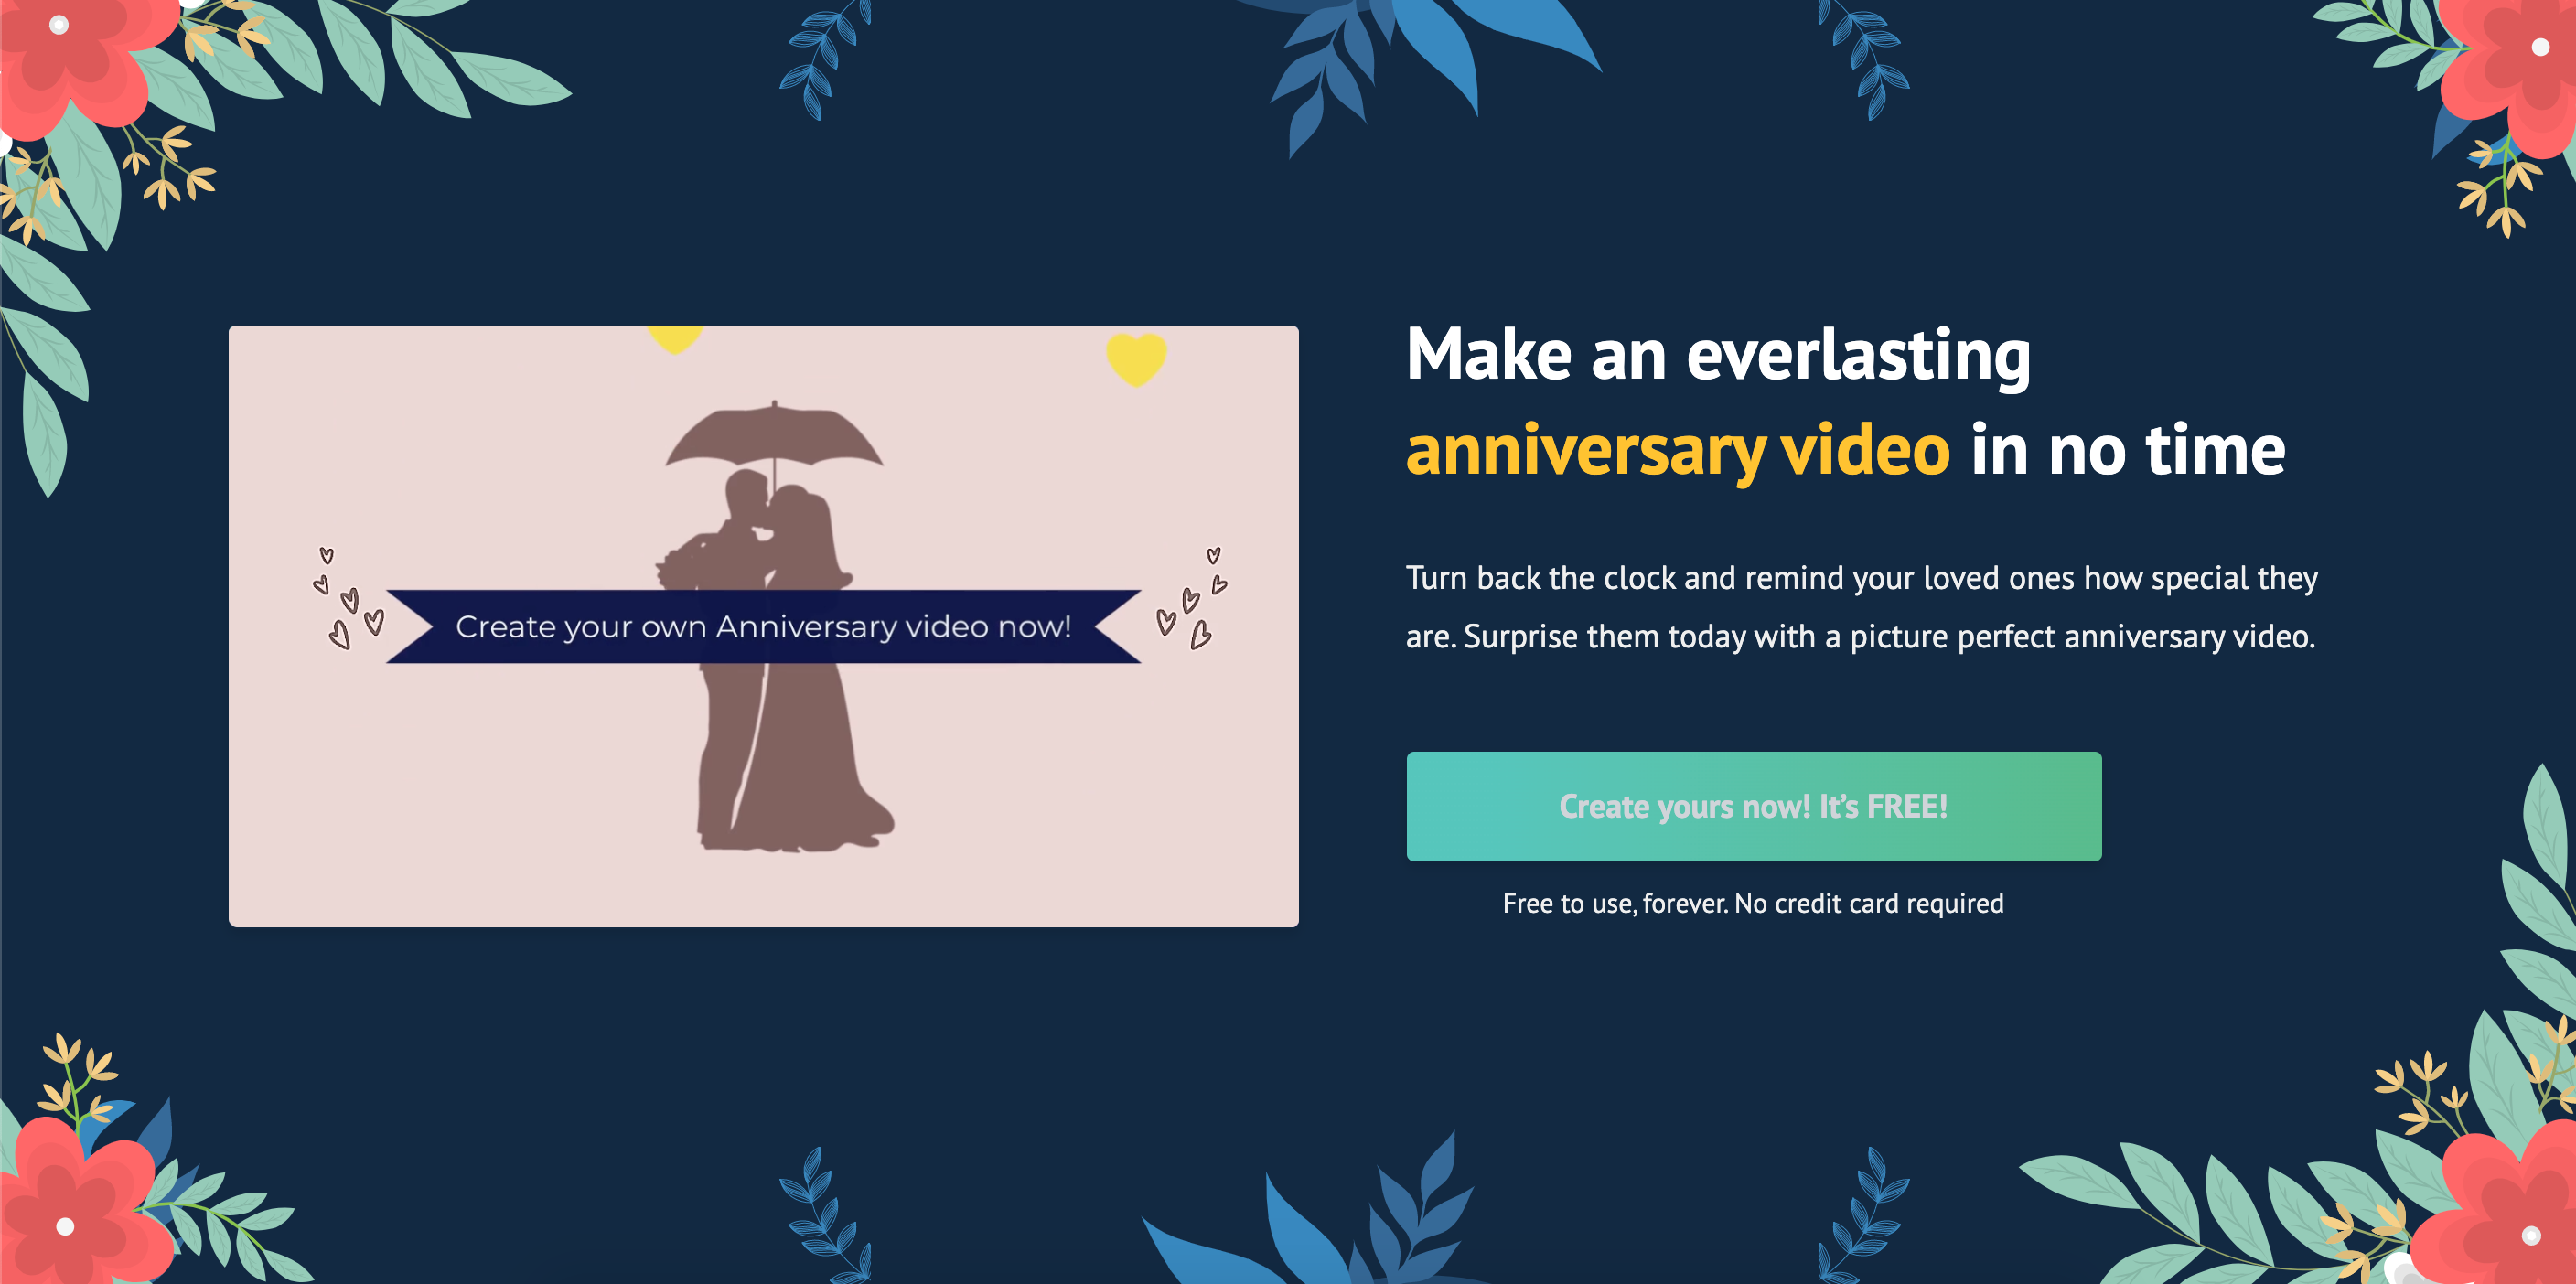 How to make a anniversary video